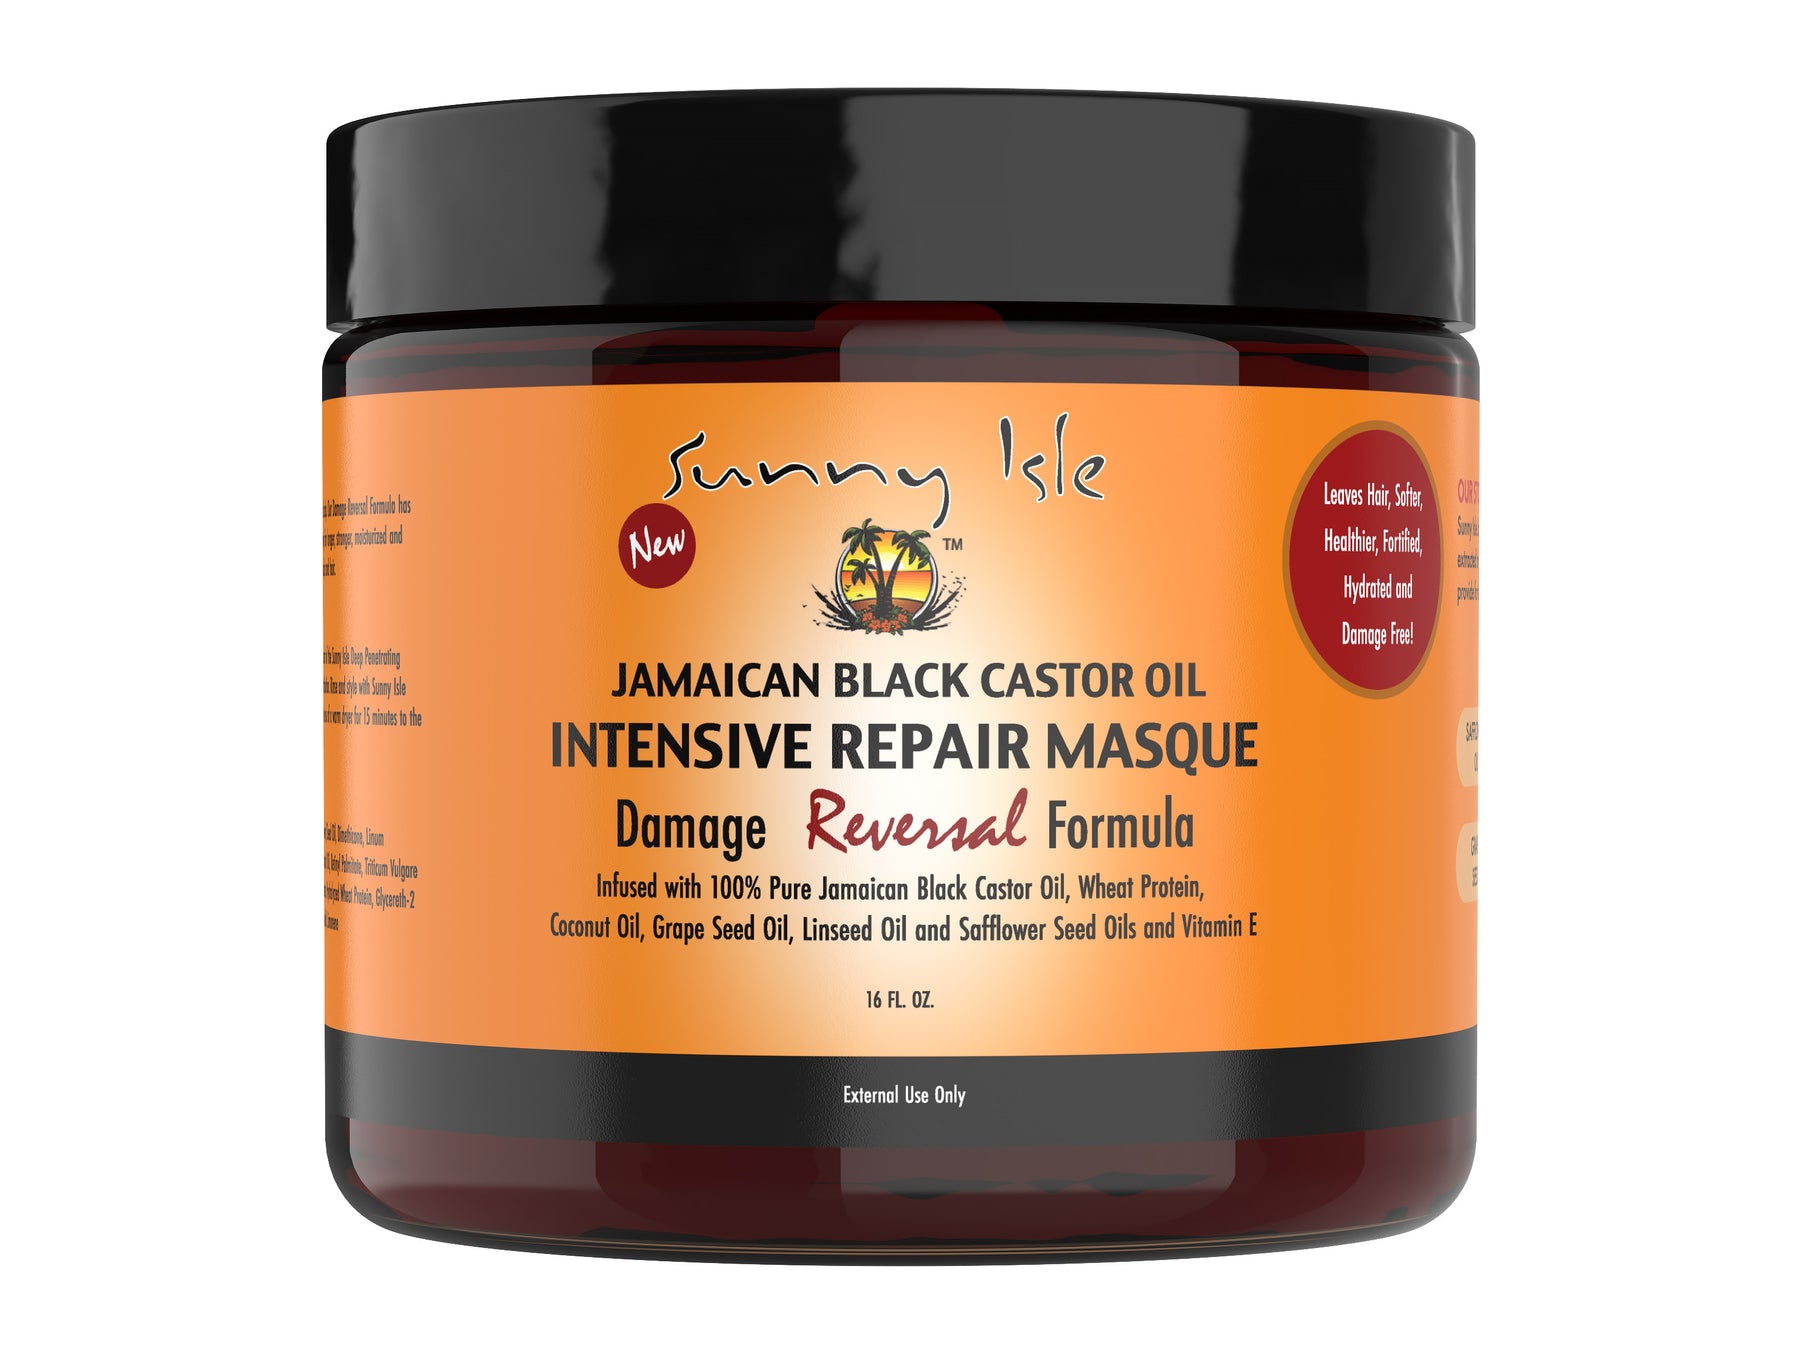 Sunny Isle Jamaican Black Castor Oil Intensive Repair Masque – Best Overall Hair Mask